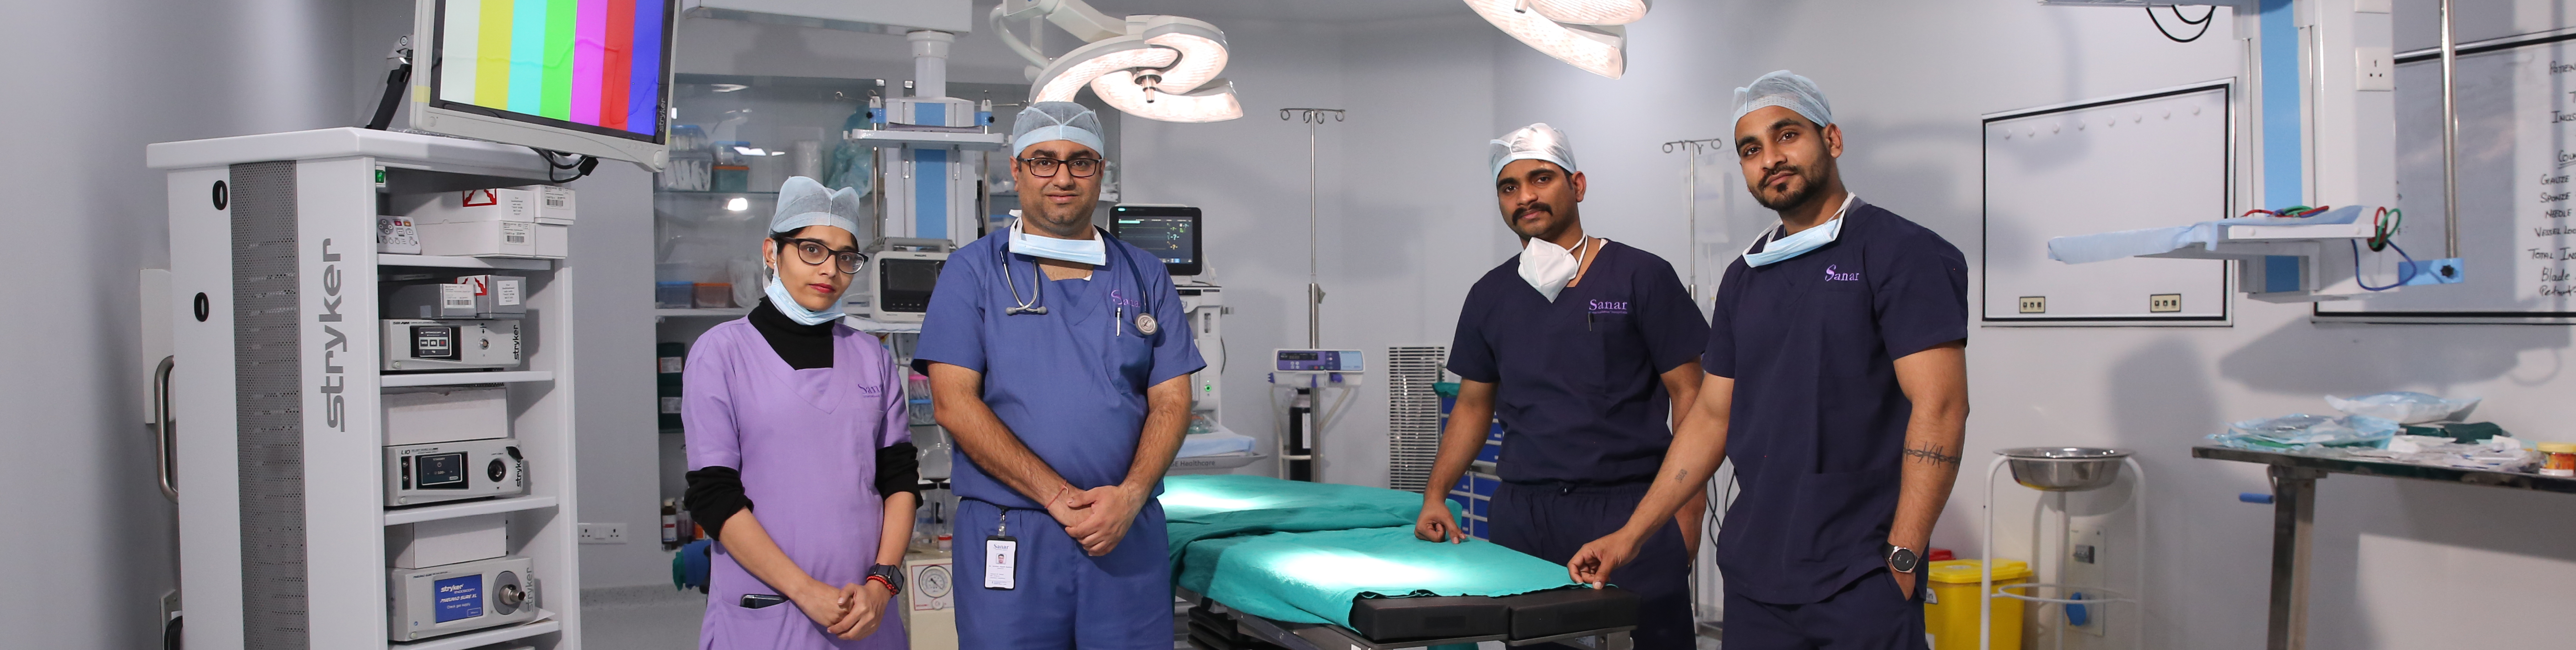 Interventional Cardiology